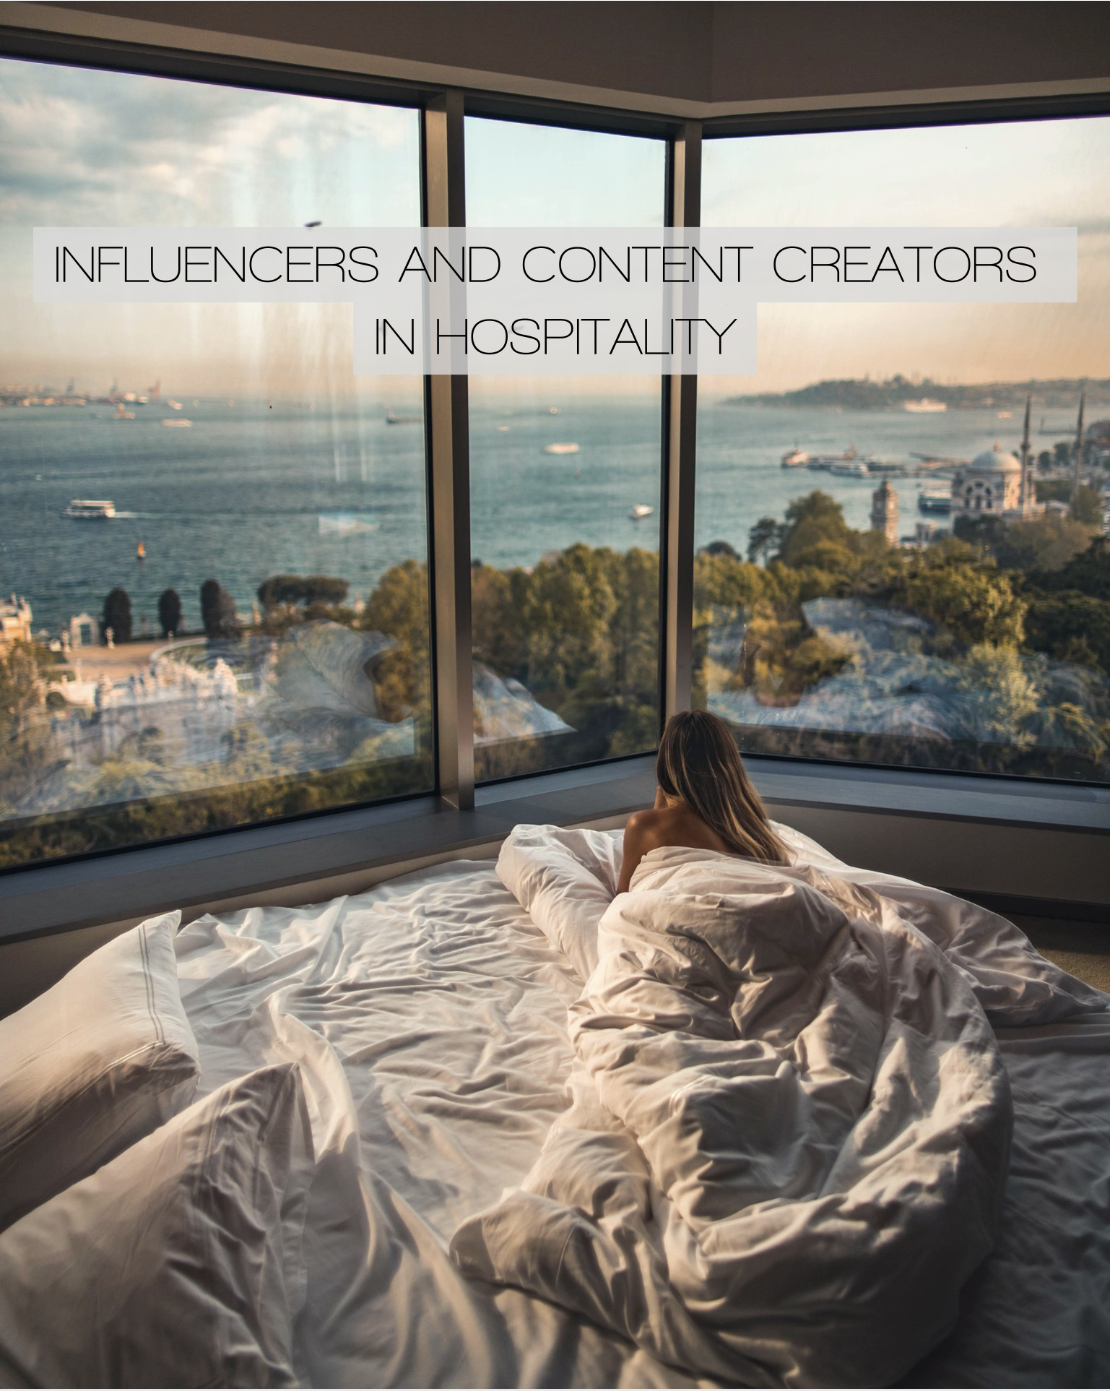 Influencers and Content Creators in Hospitality